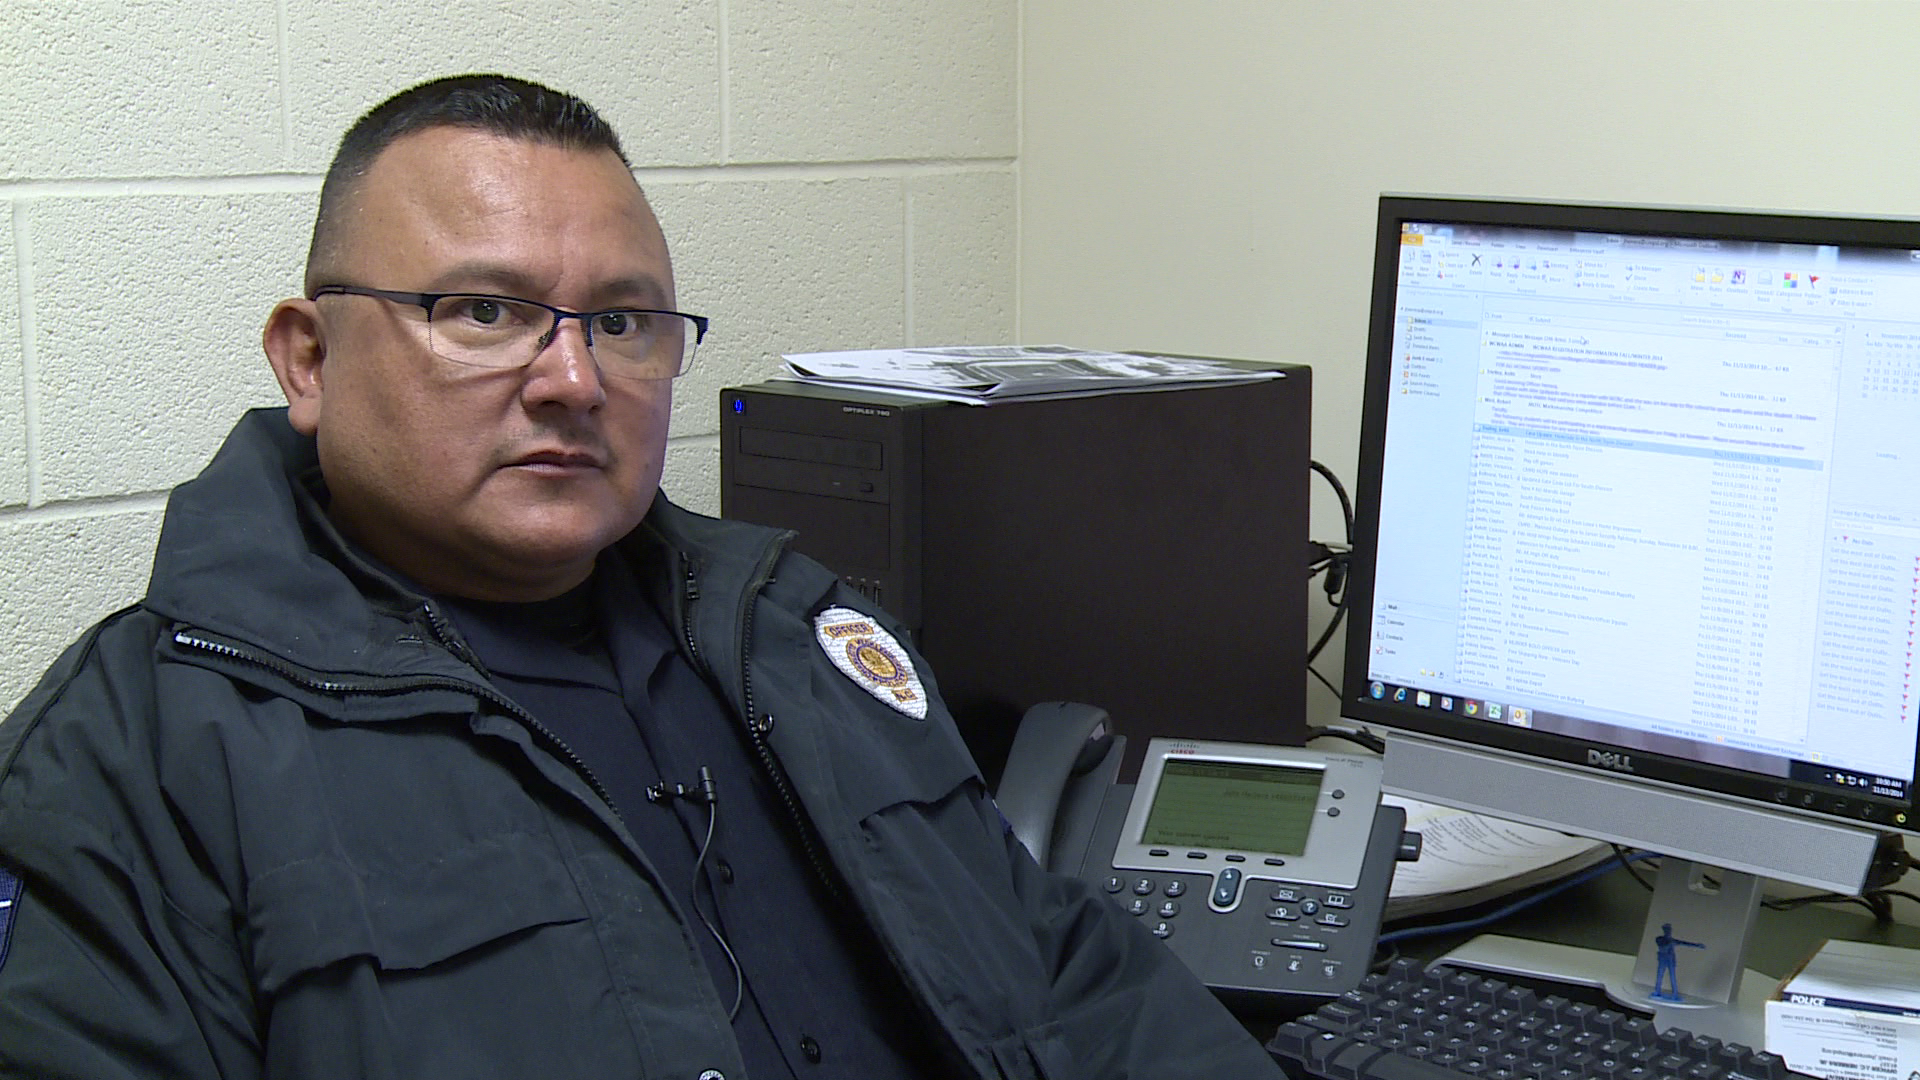 In 2014, CMPD Officer J.C. Herrera saved a student who was choking at Ardrey Kell High School in Charlotte.